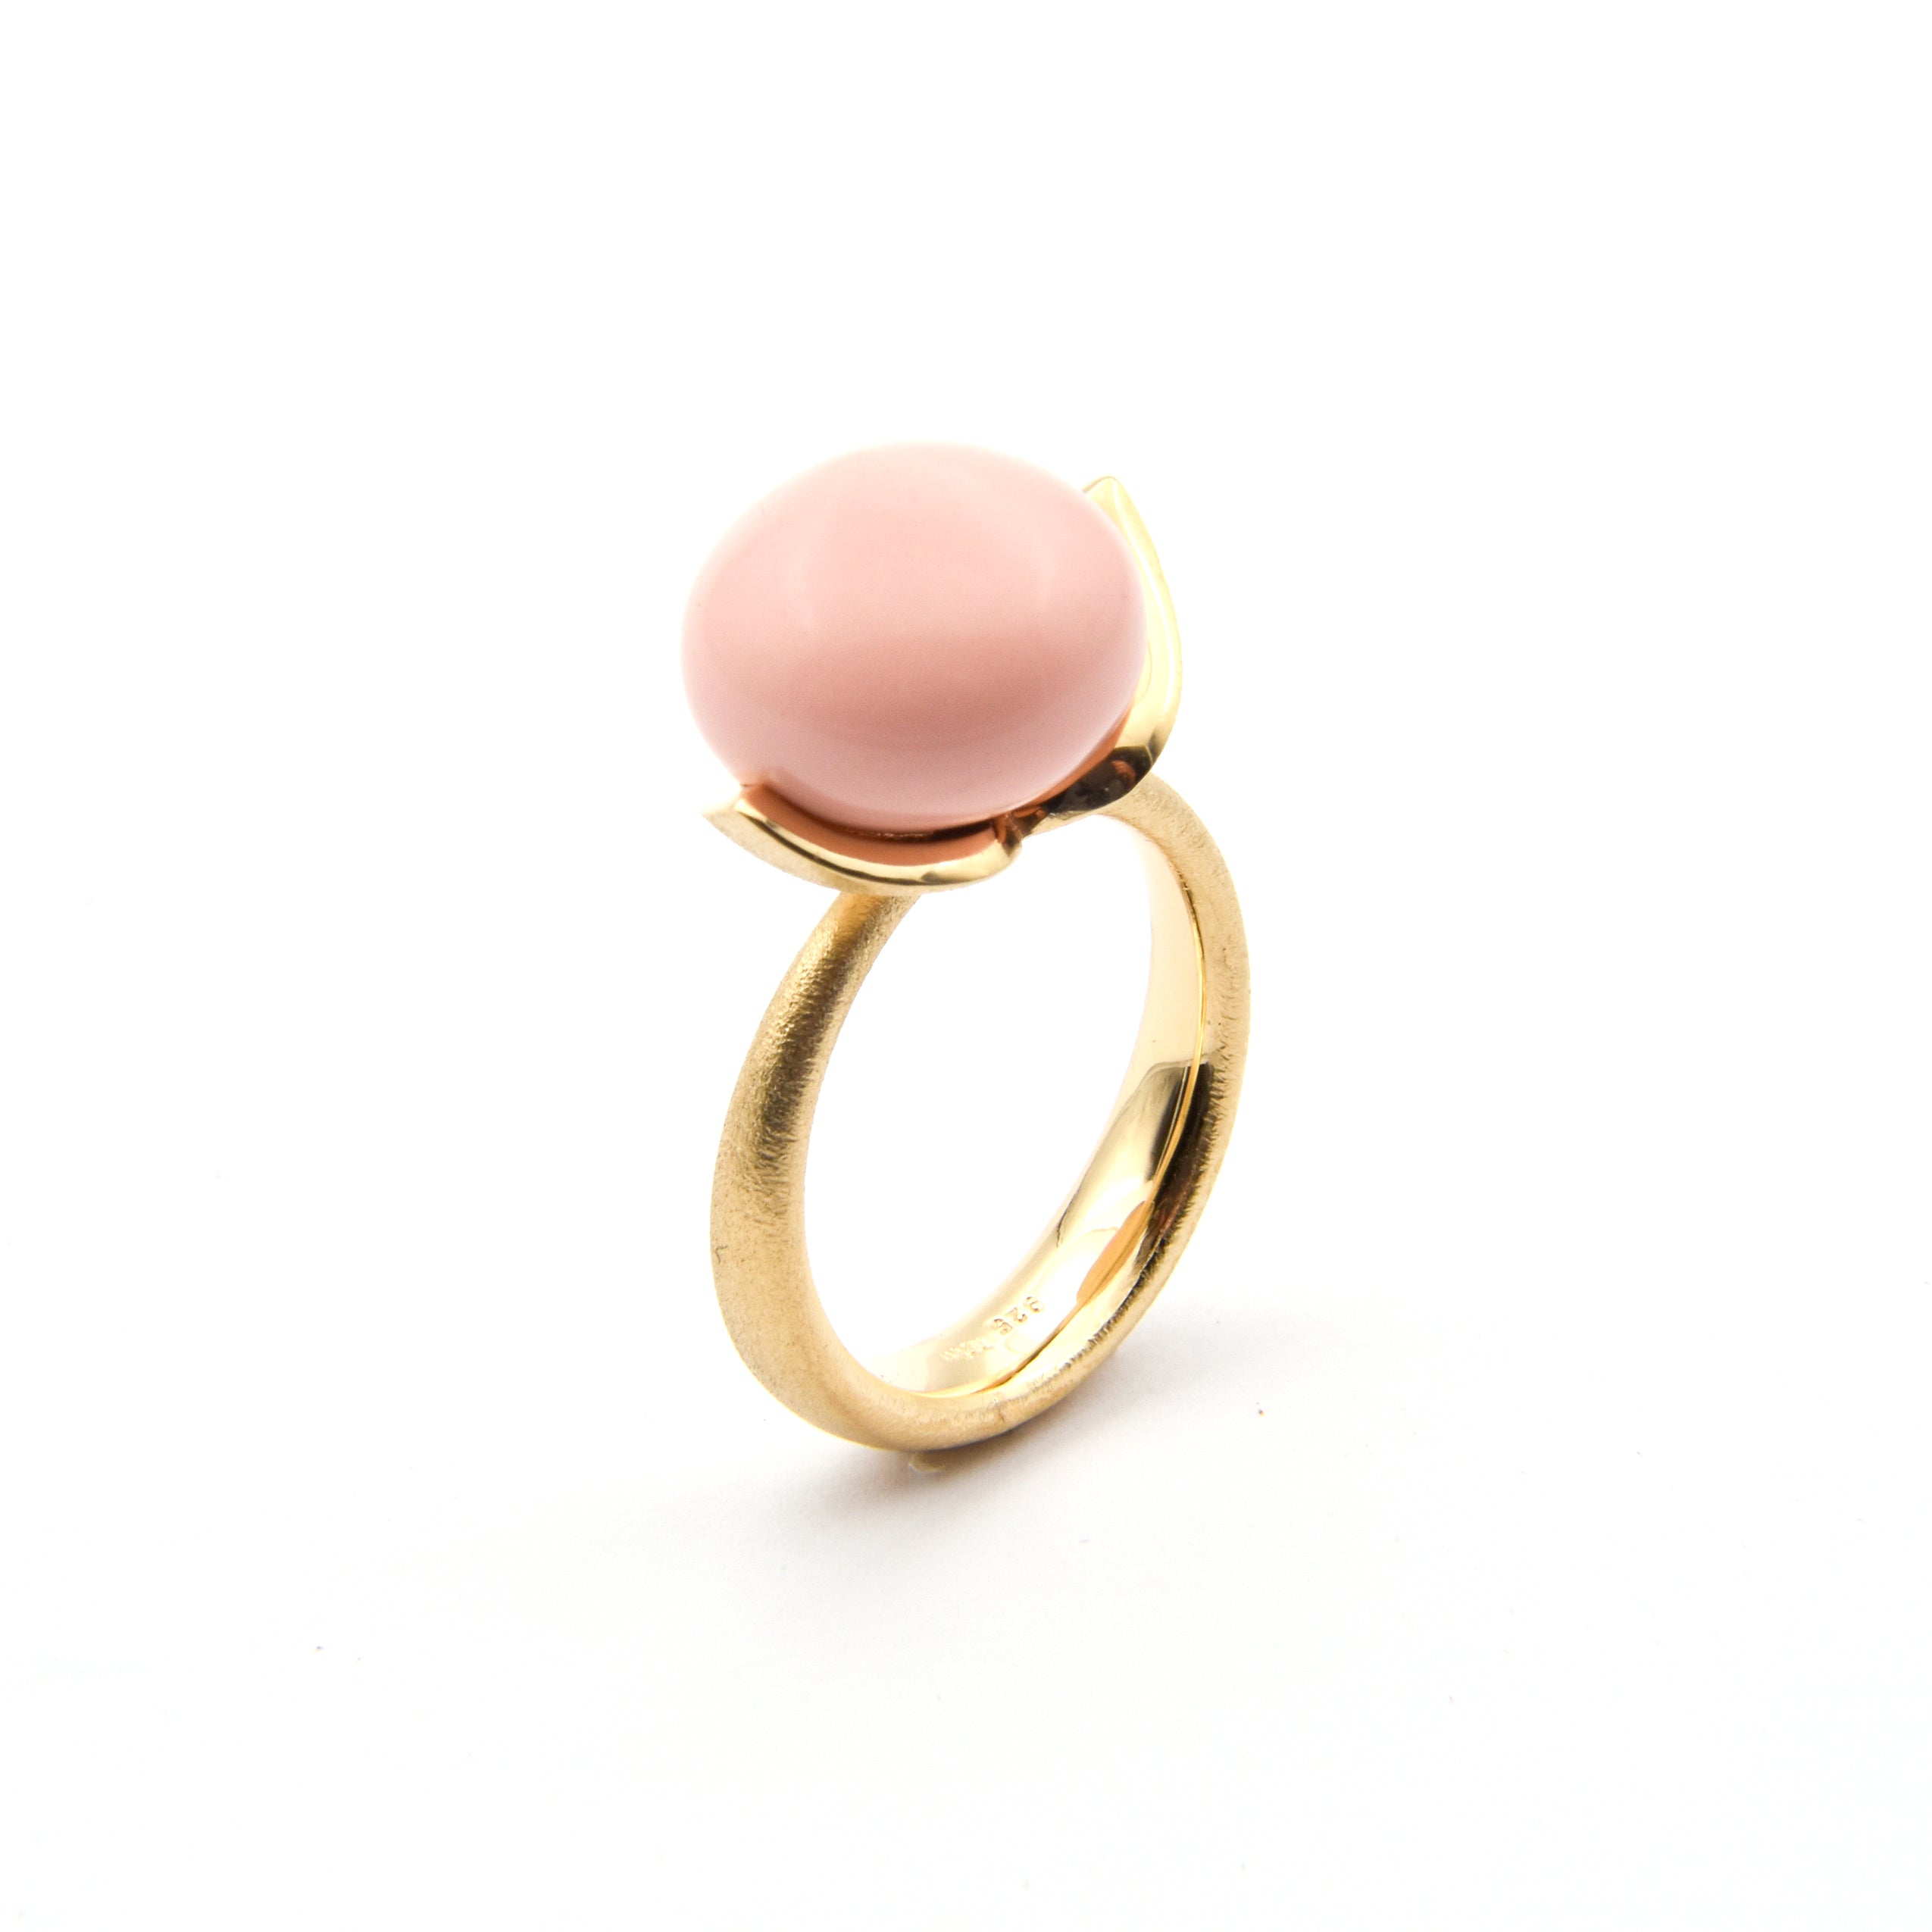 Dolce ring "big" with coral angel skin rec. 925/-